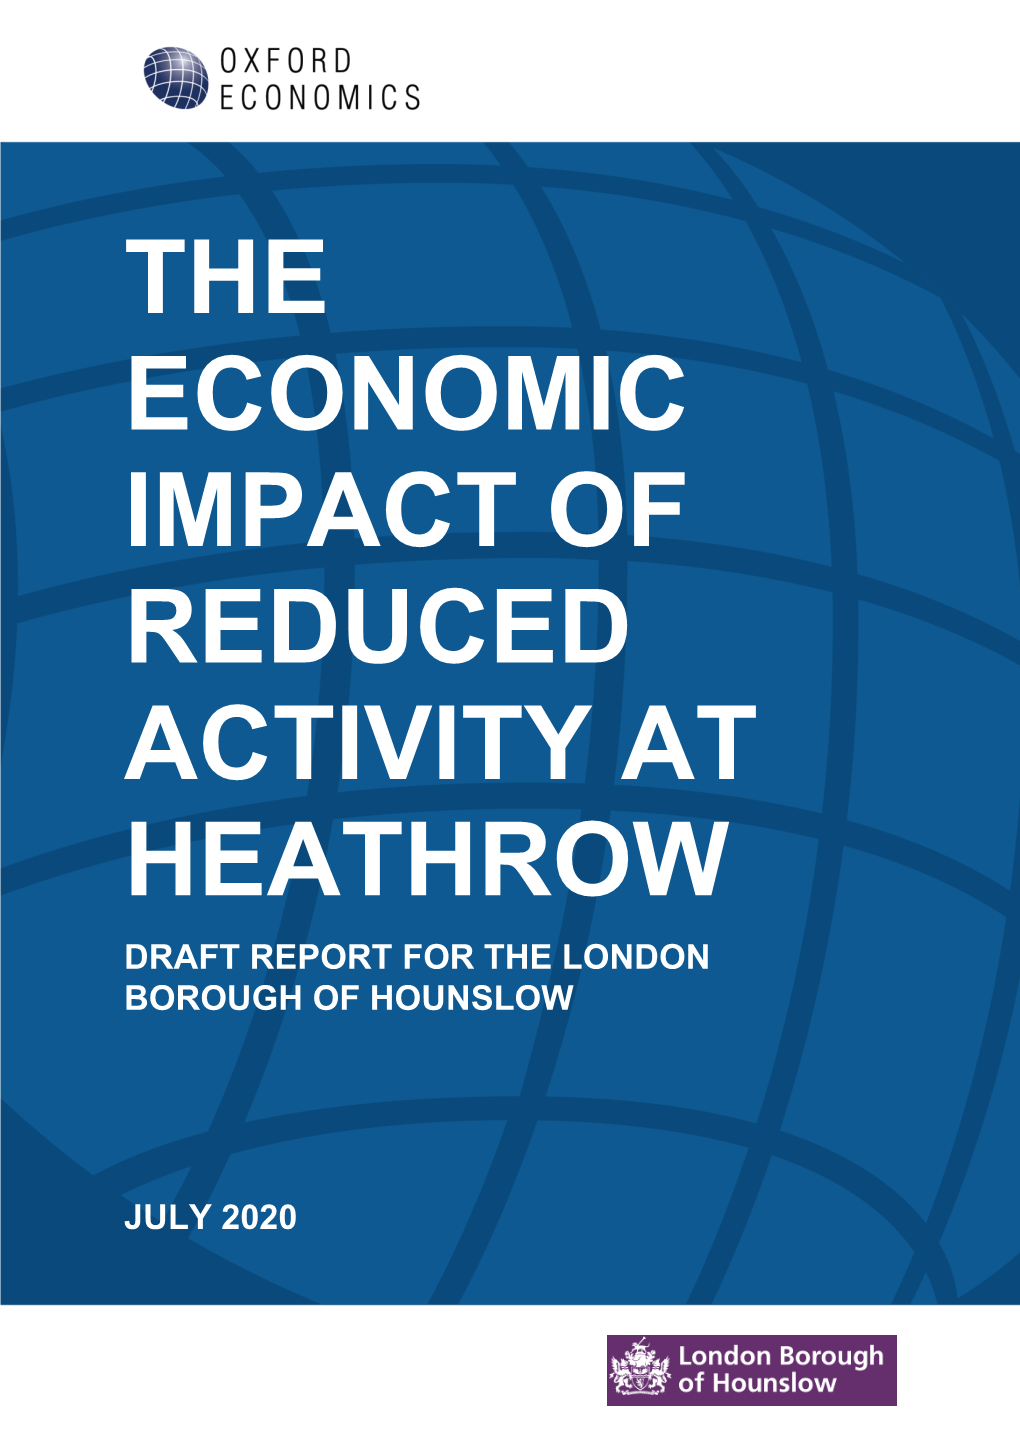 The Economic Impact of Reduced Activity at Heathrow